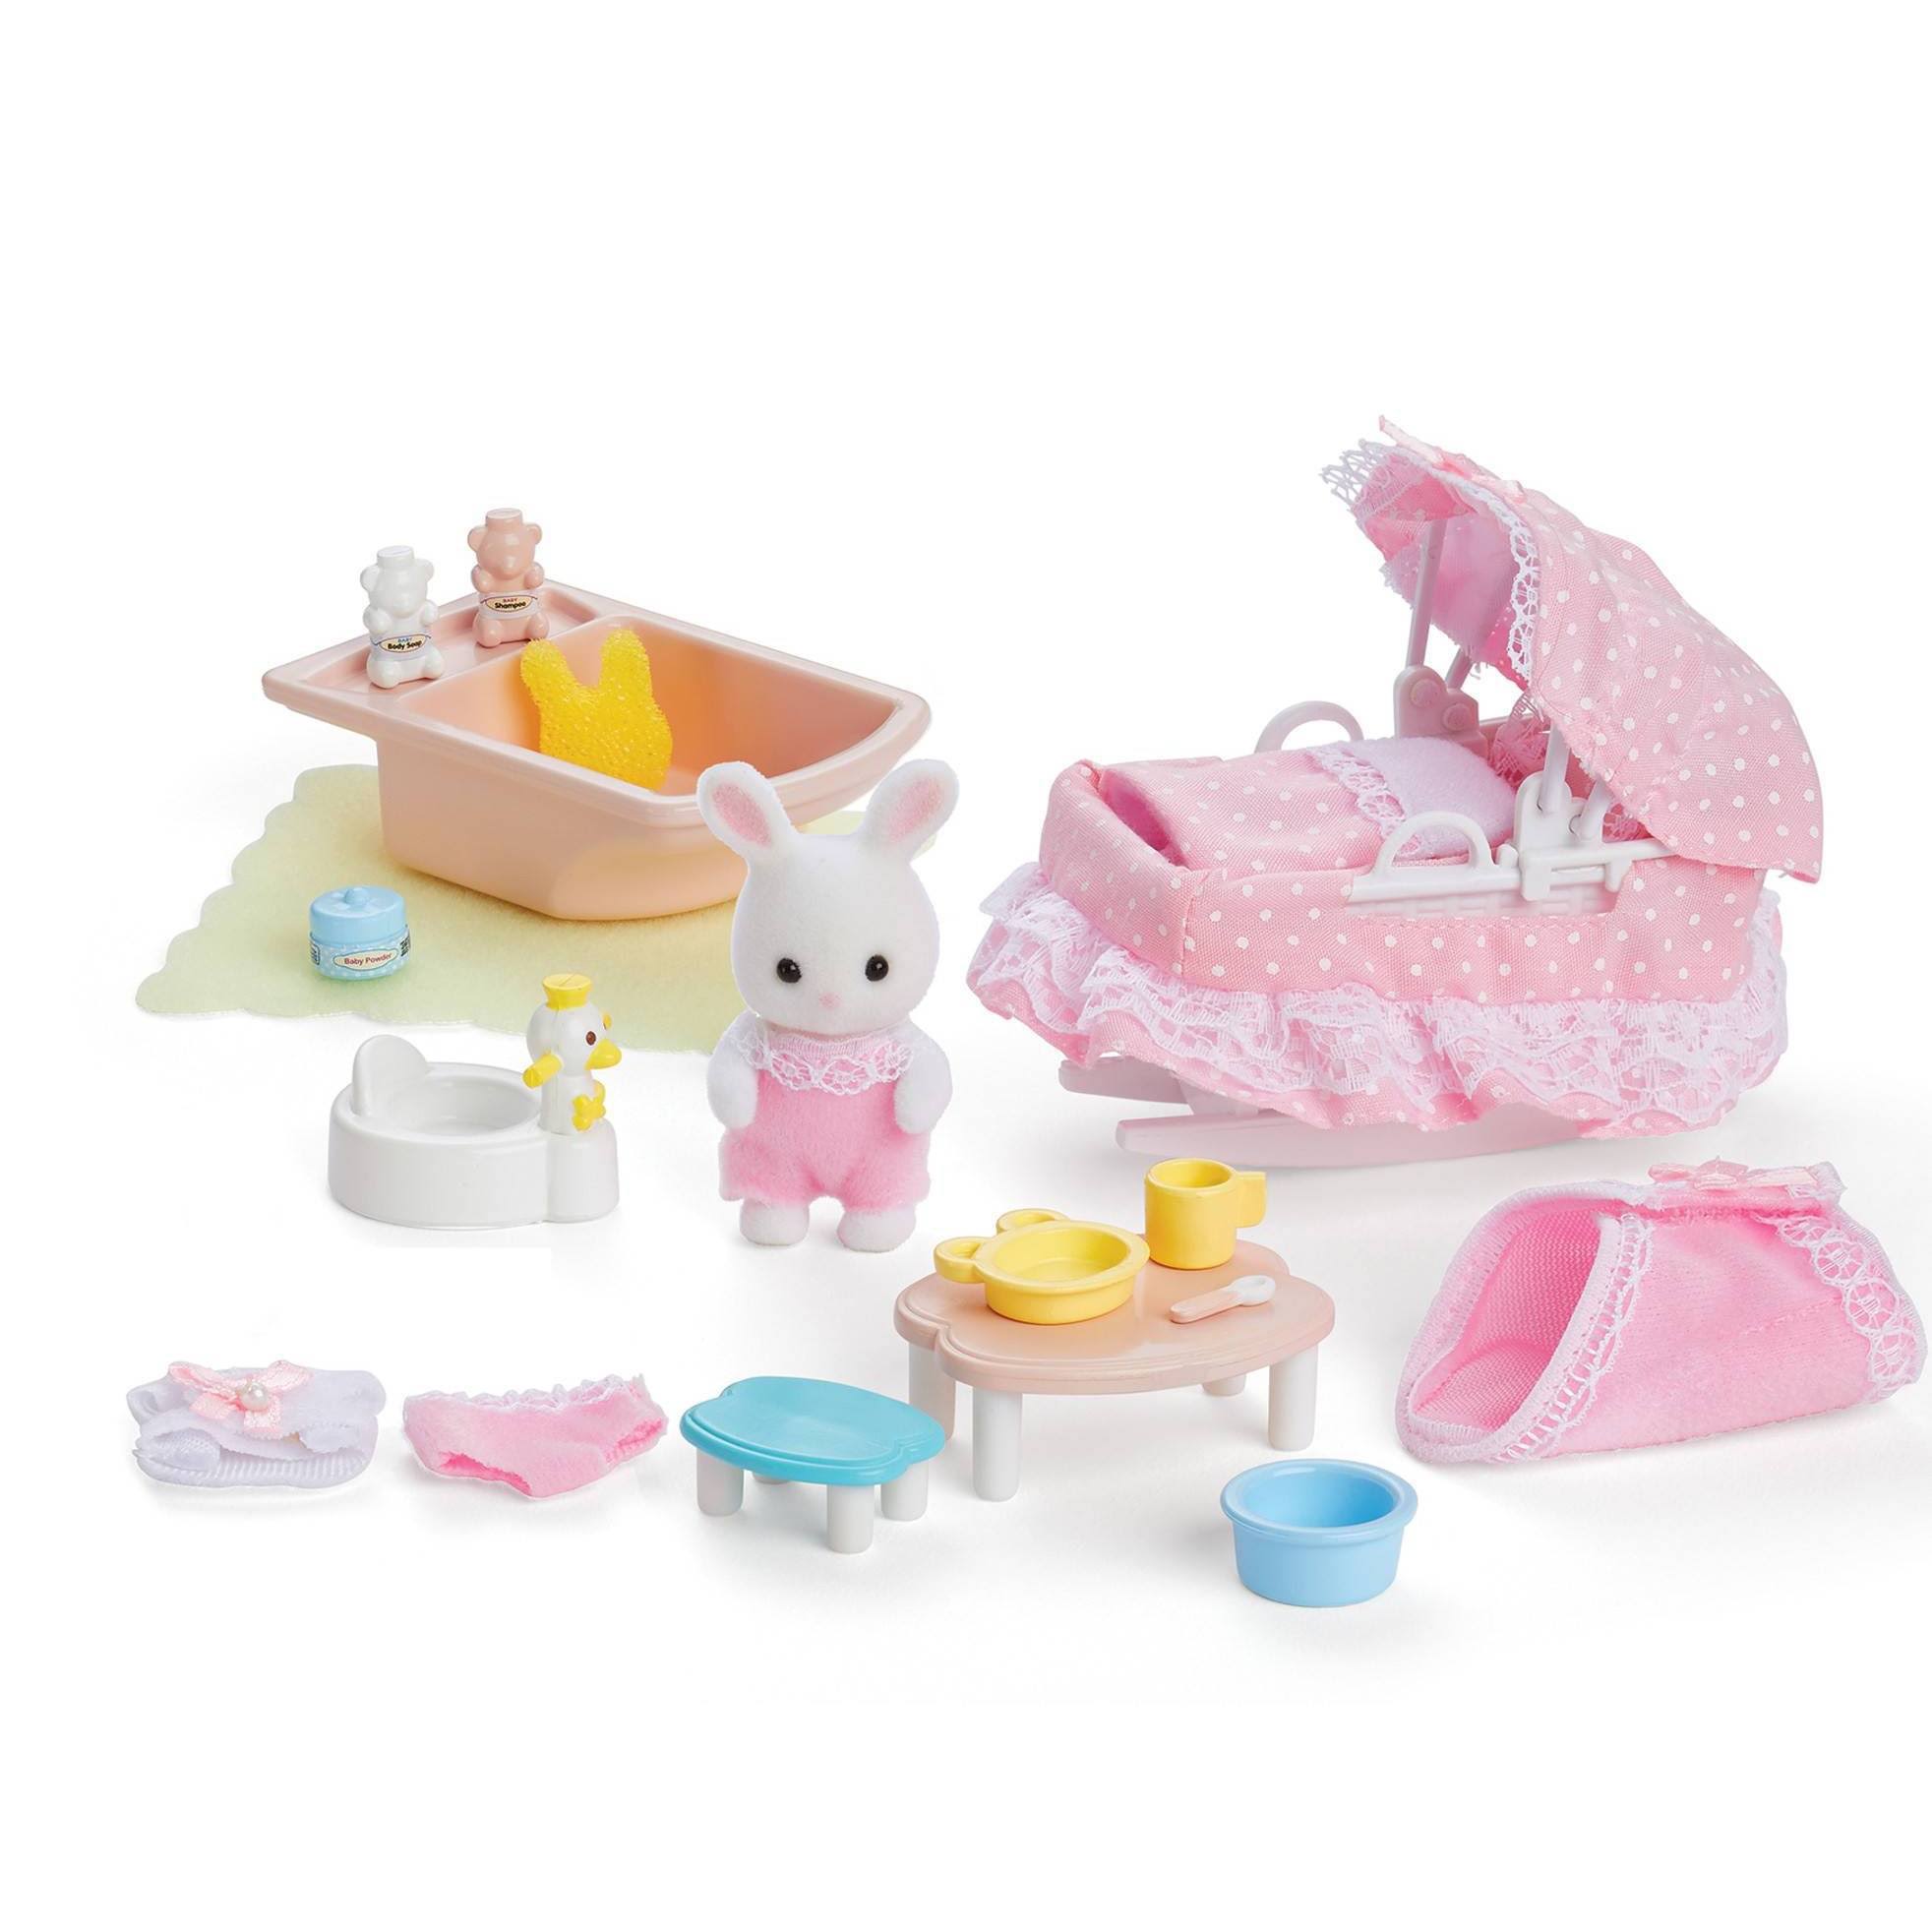 Calico Critters Baby's Love 'N Care Toy Set